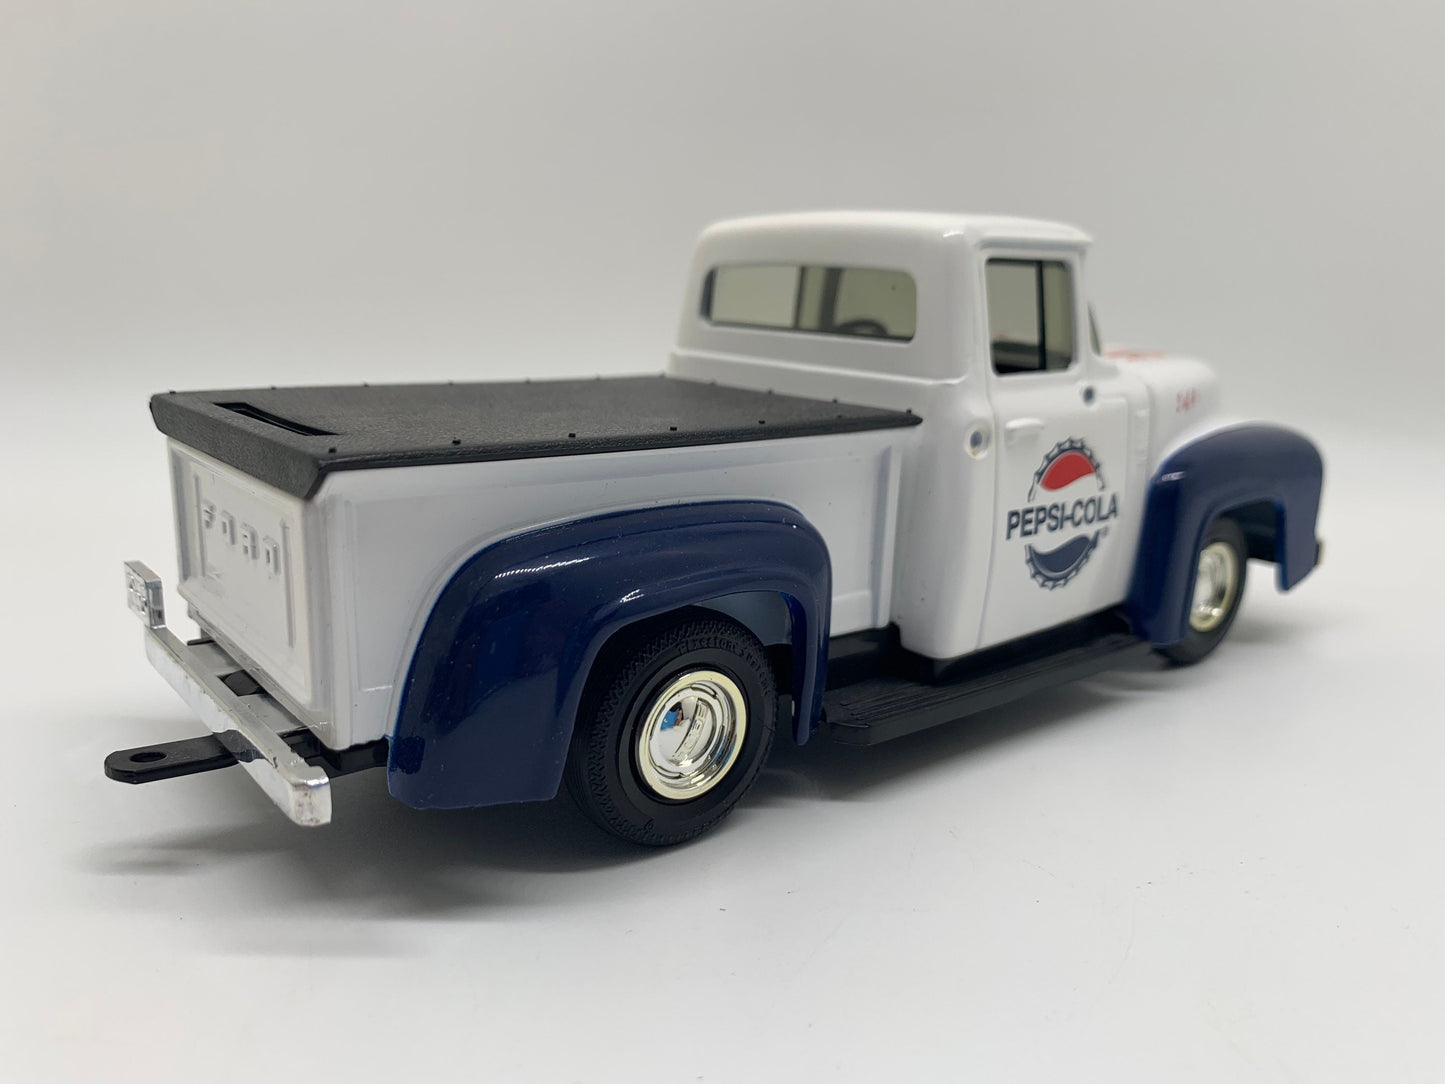 Ertl 1956 Ford Pickup White Pepsi Cola Perfect Birthday Gift Collectible Scale Model Toy Car Pepsi Coin Bank